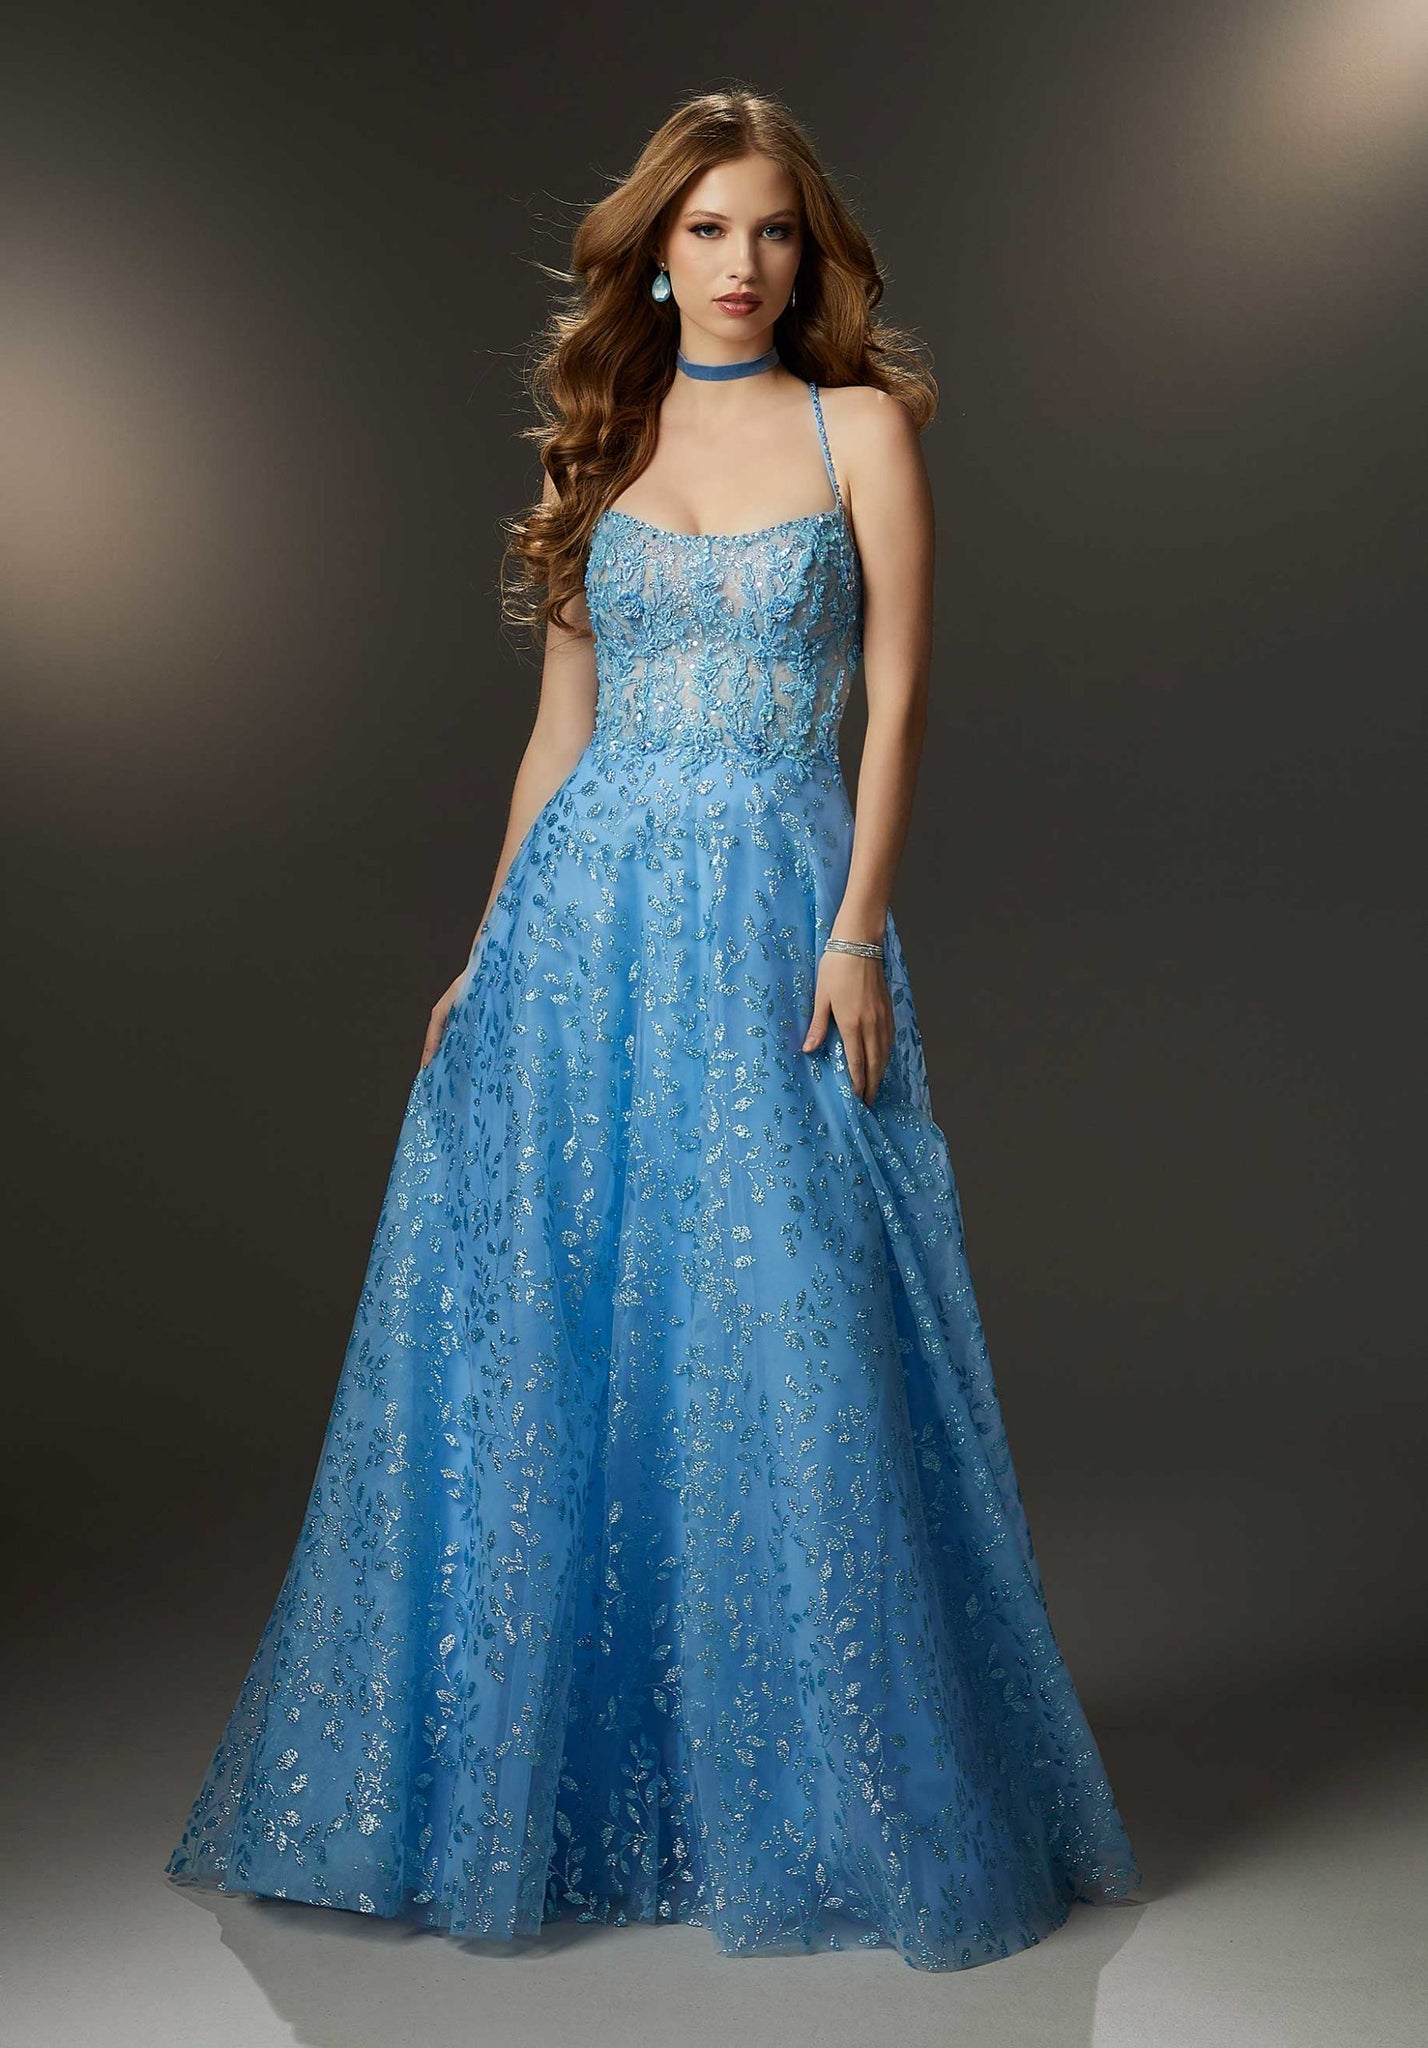 This lovely A-line prom dress has a sheer scoop neckline on a corset bodice with a softly flowing skirt all adorned in sparkling crystal beaded embroidery on botanical patterned glitter net. The delicate beaded straps crisscross in the back to meet up with a lace-up corset detail.